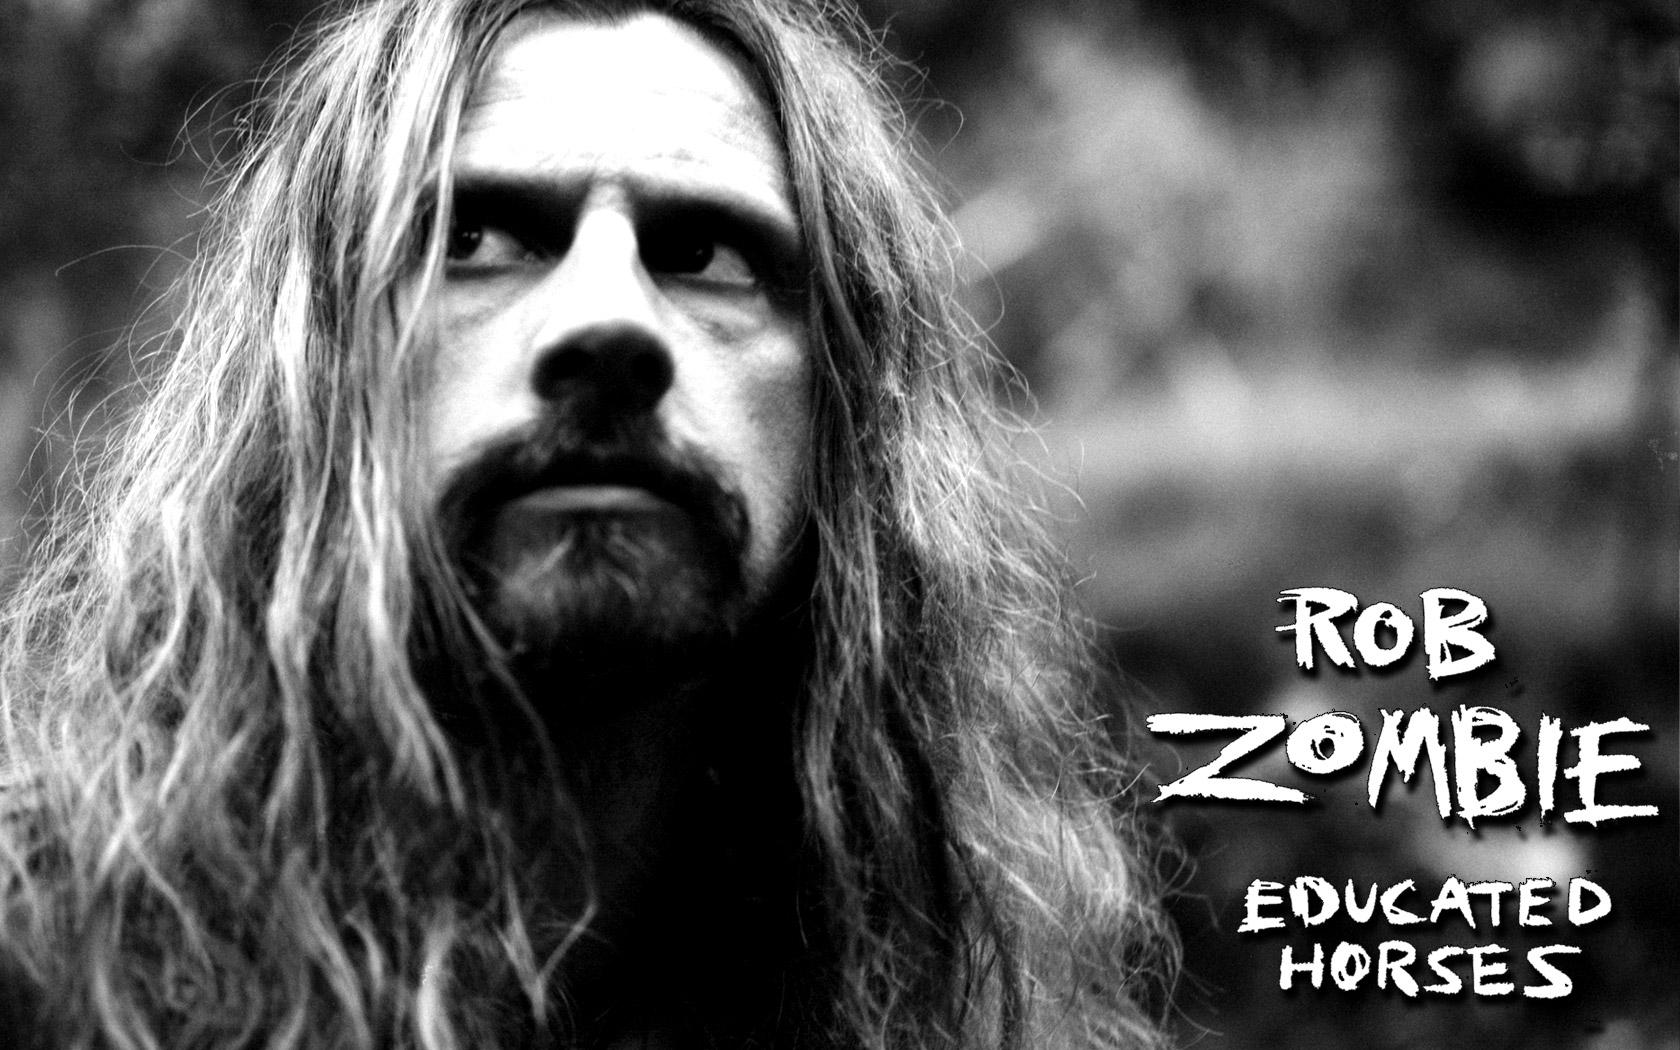 Download the Face of Rob Zombie Wallpaper, Face of Rob